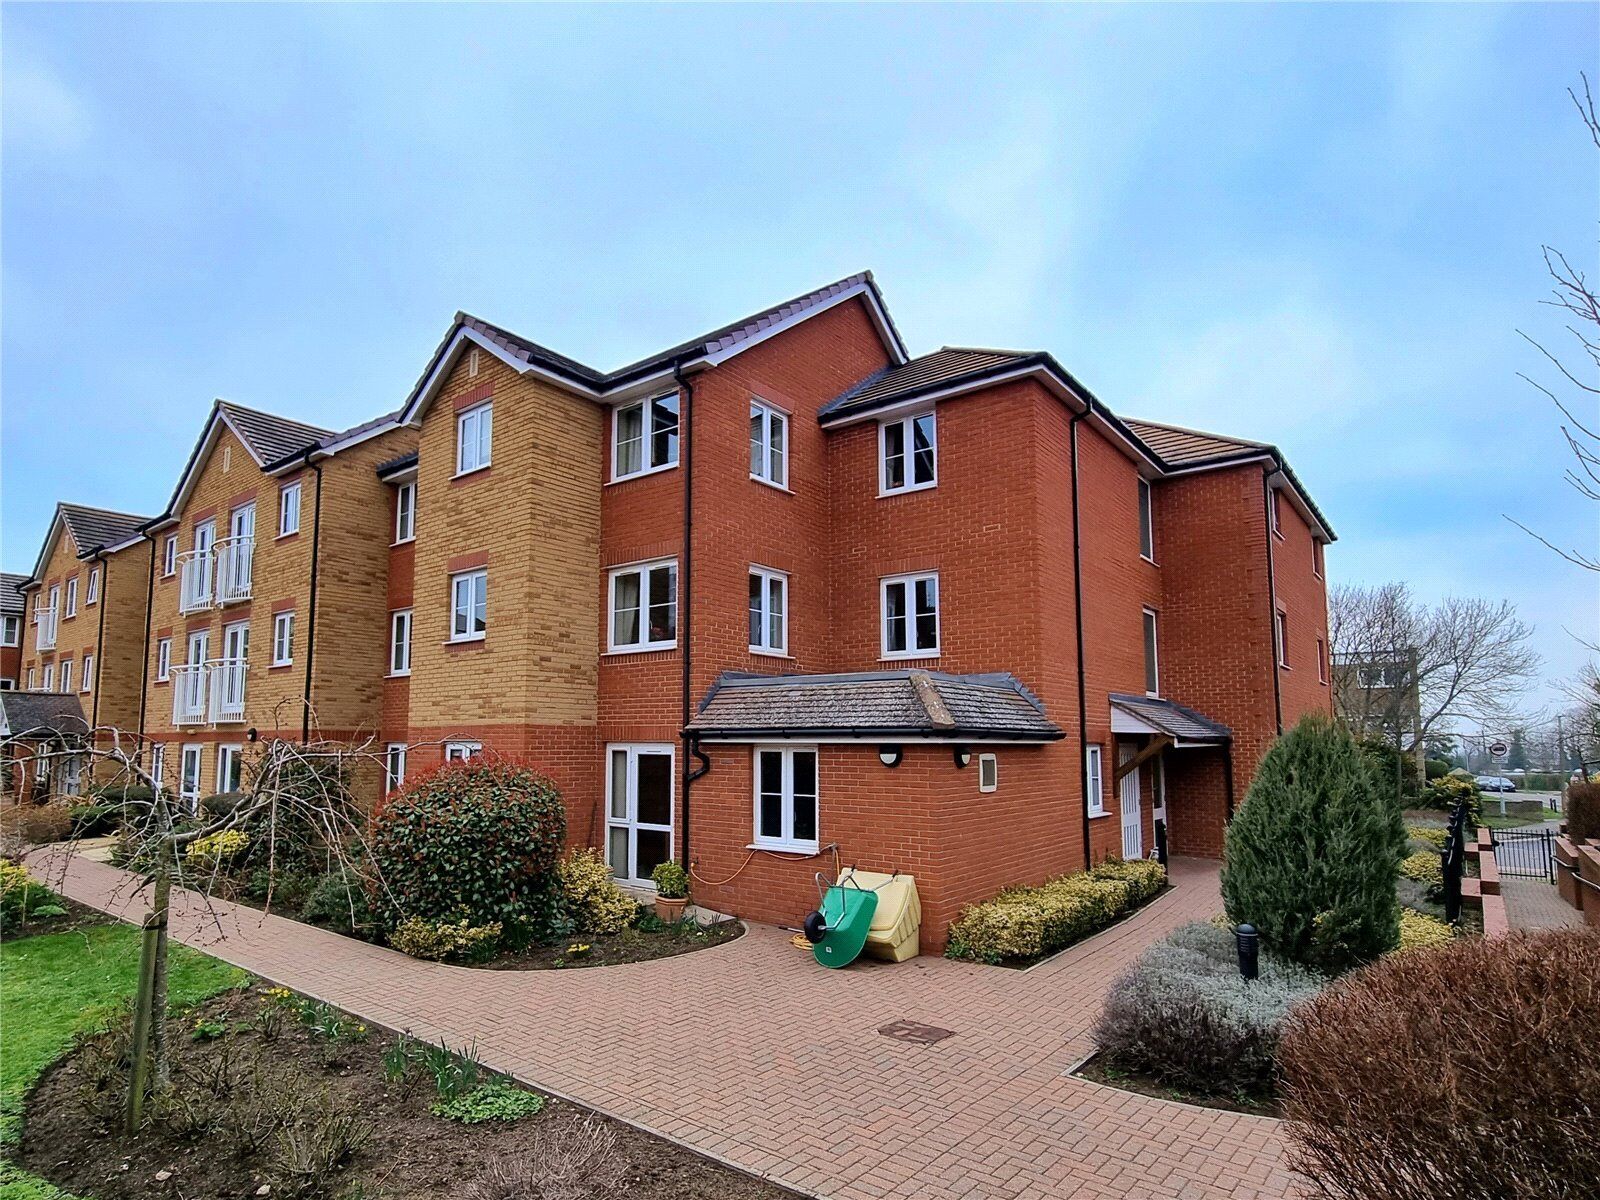 1 bedroom  property for sale Goodes Court, Royston, SG8, main image